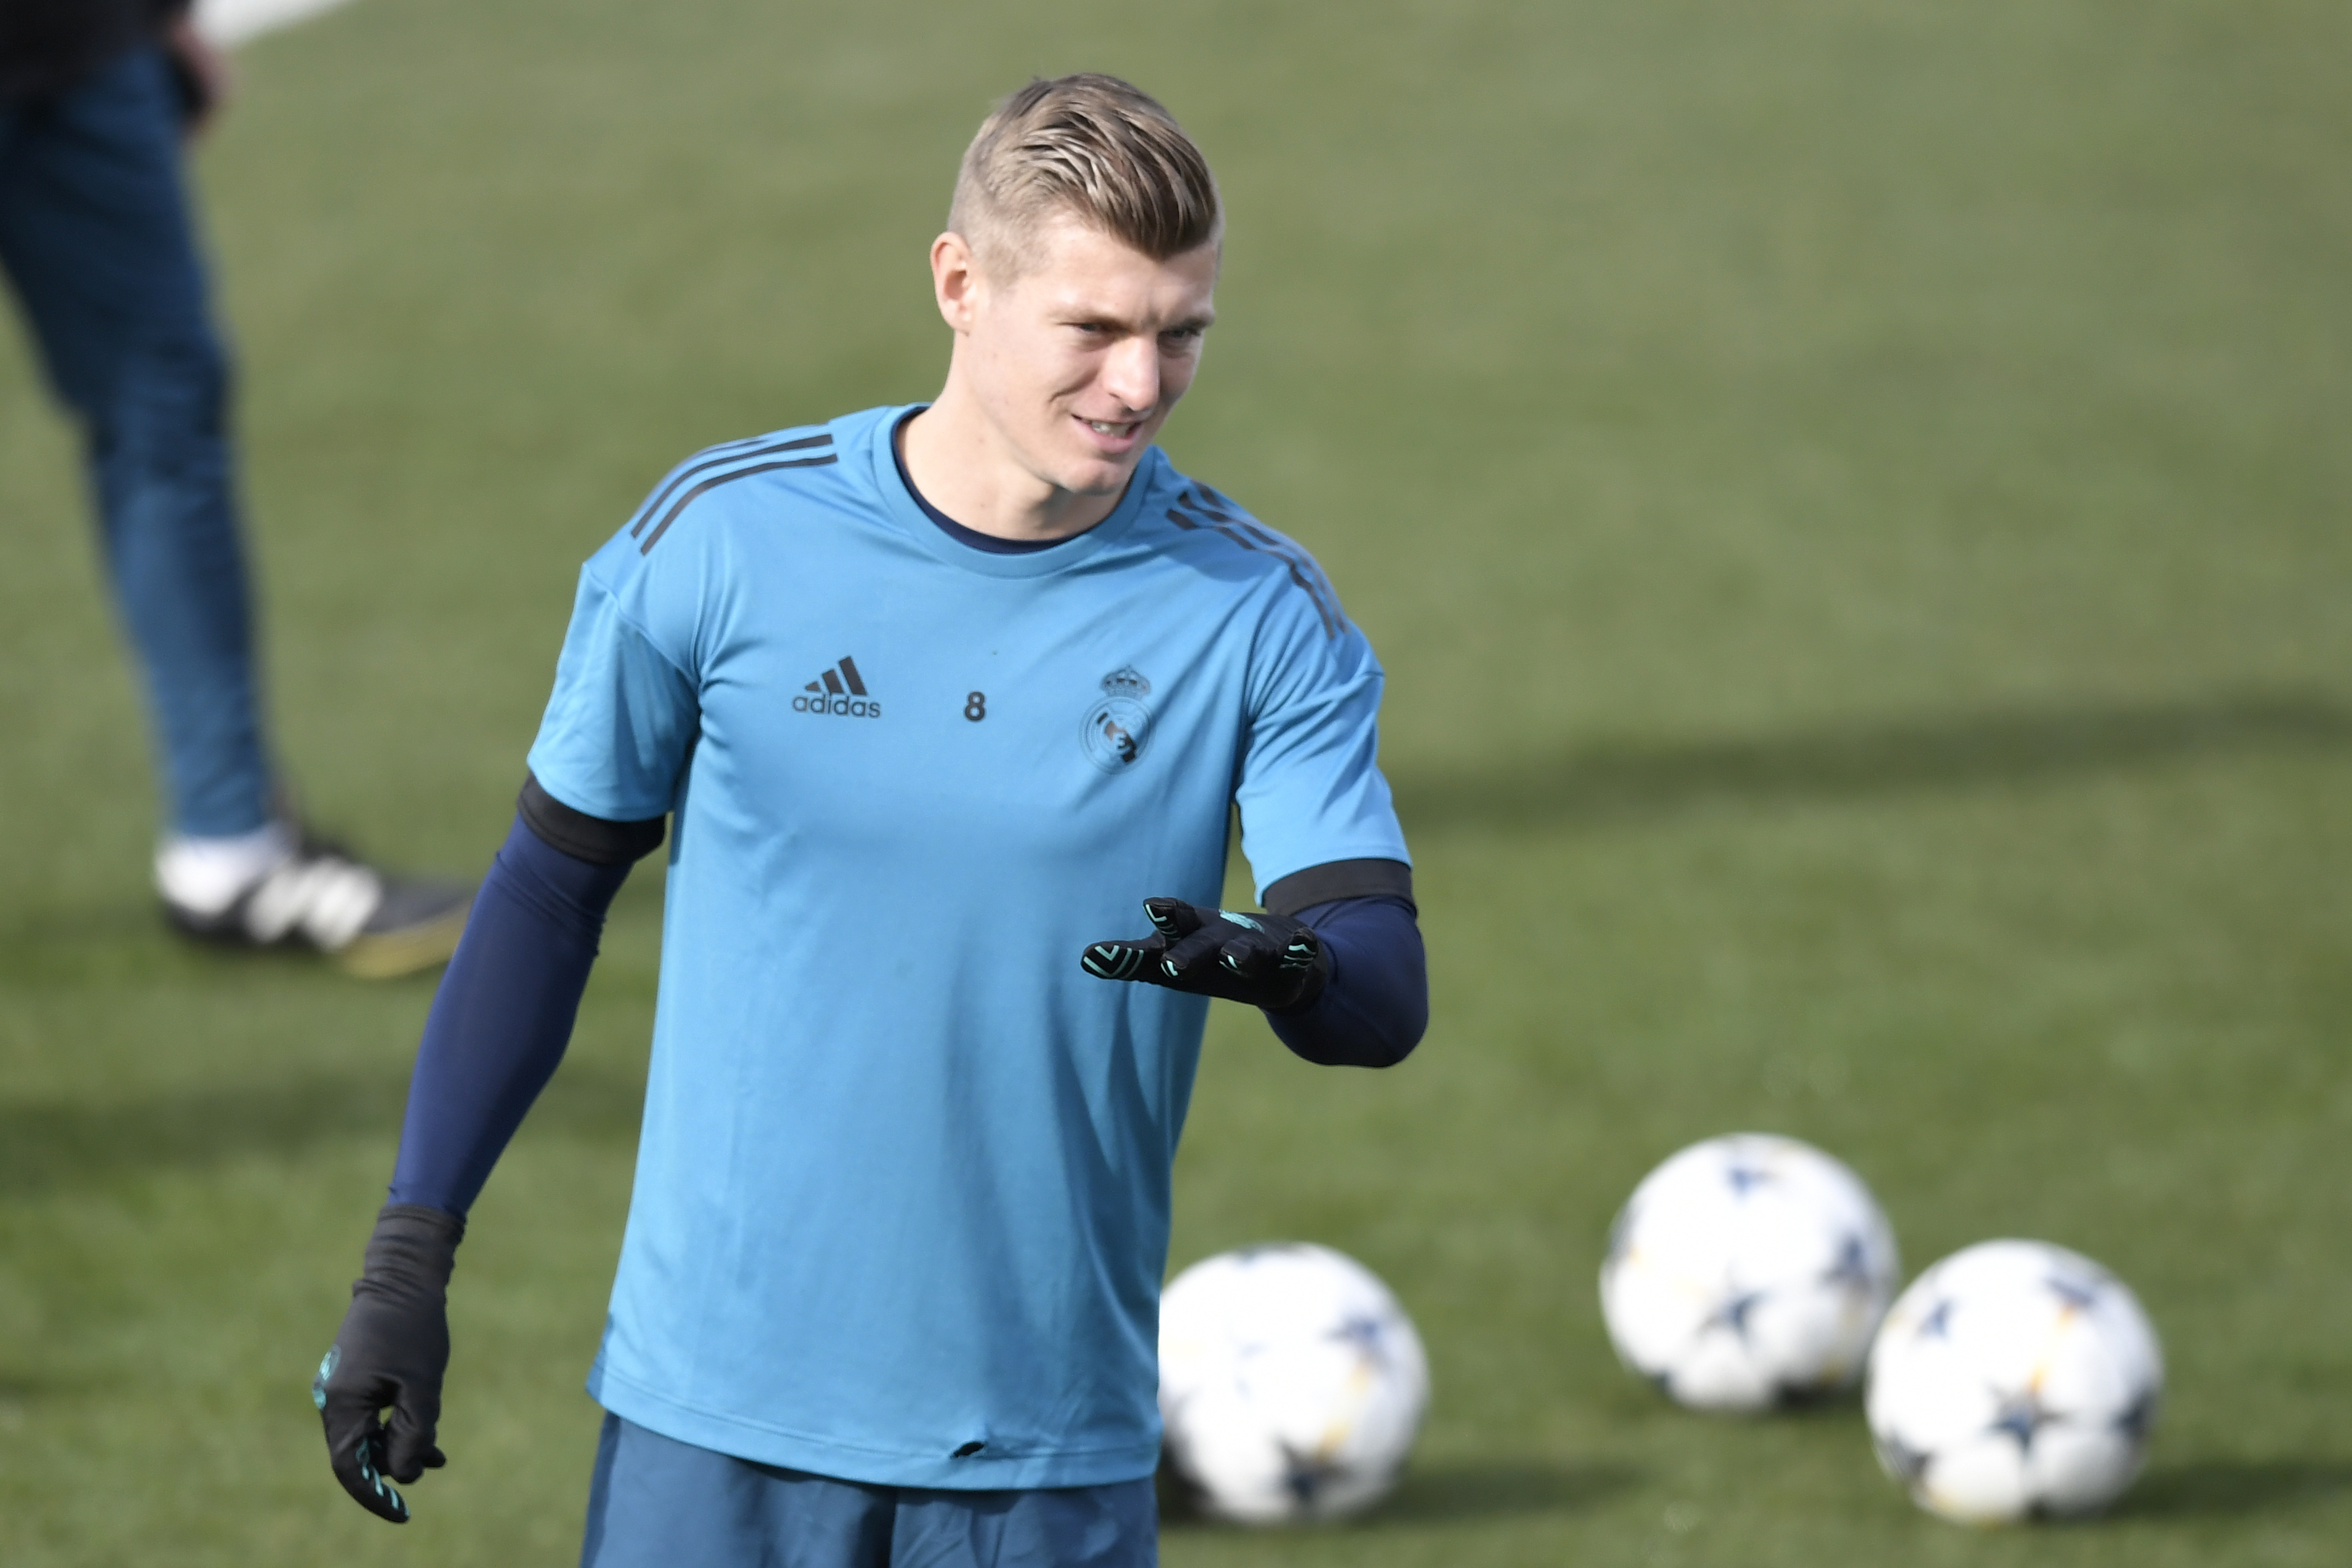 Real Madrid's German midfielder Toni Kroos attends a training session at Valdebebas Sport City in Madrid on February 13, 2018 on the eve of the Champions' League football match against Paris Saint-Germain (PSG). / AFP PHOTO / GABRIEL BOUYS        (Photo credit should read GABRIEL BOUYS/AFP/Getty Images)